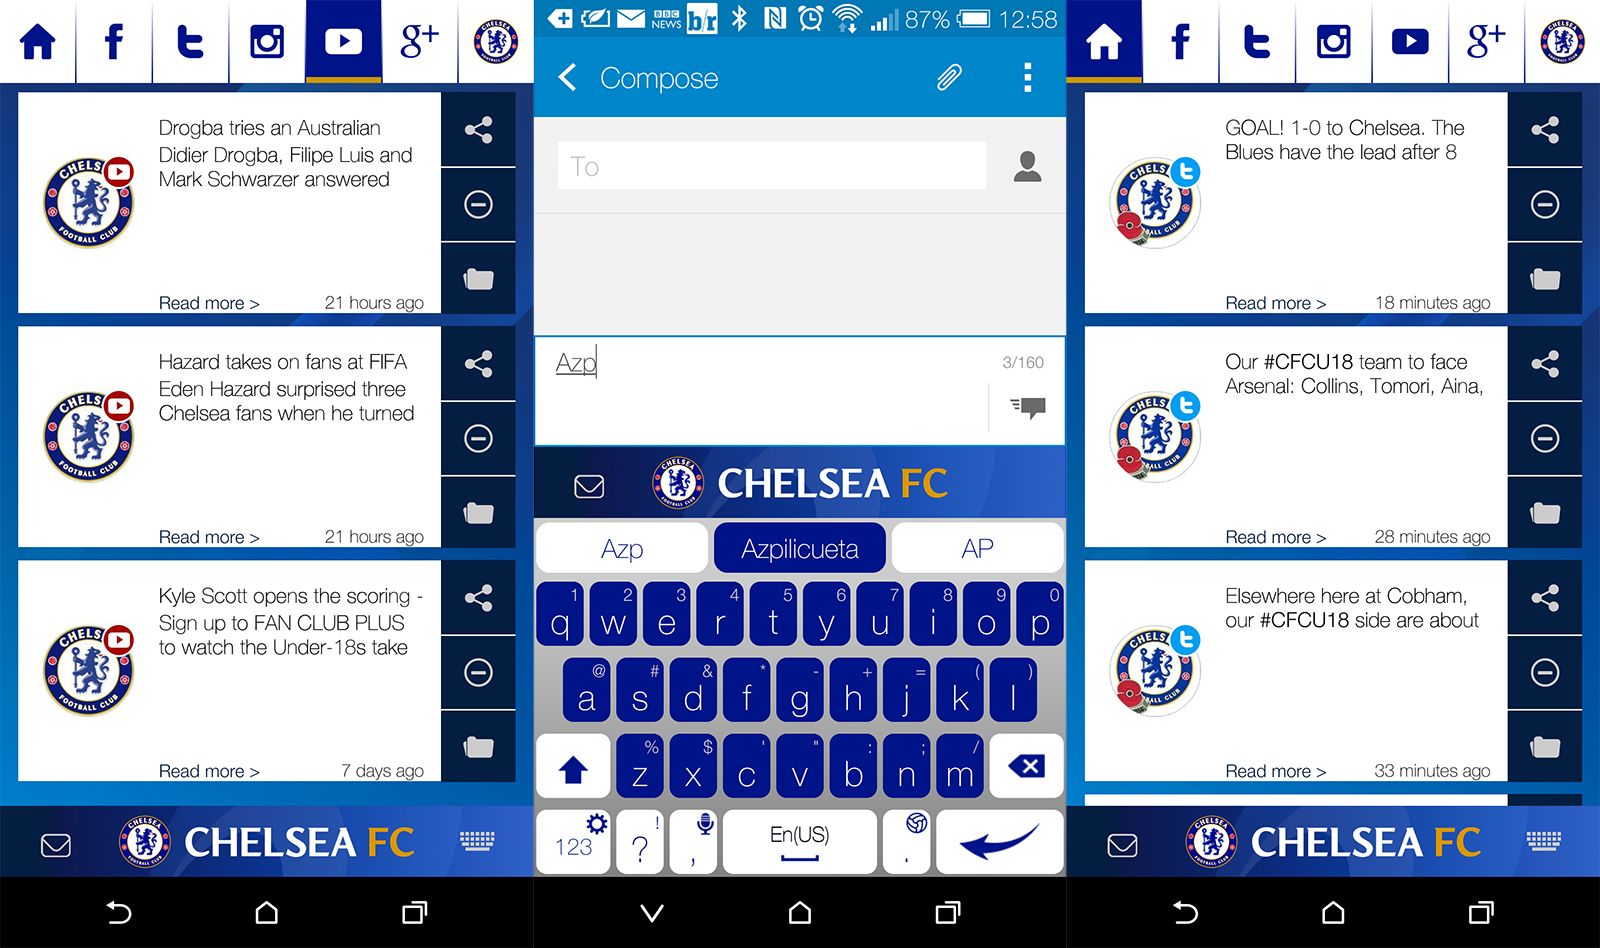 man city and chelsea fans can change their android keyboards to club colours iphone coming soon image 1